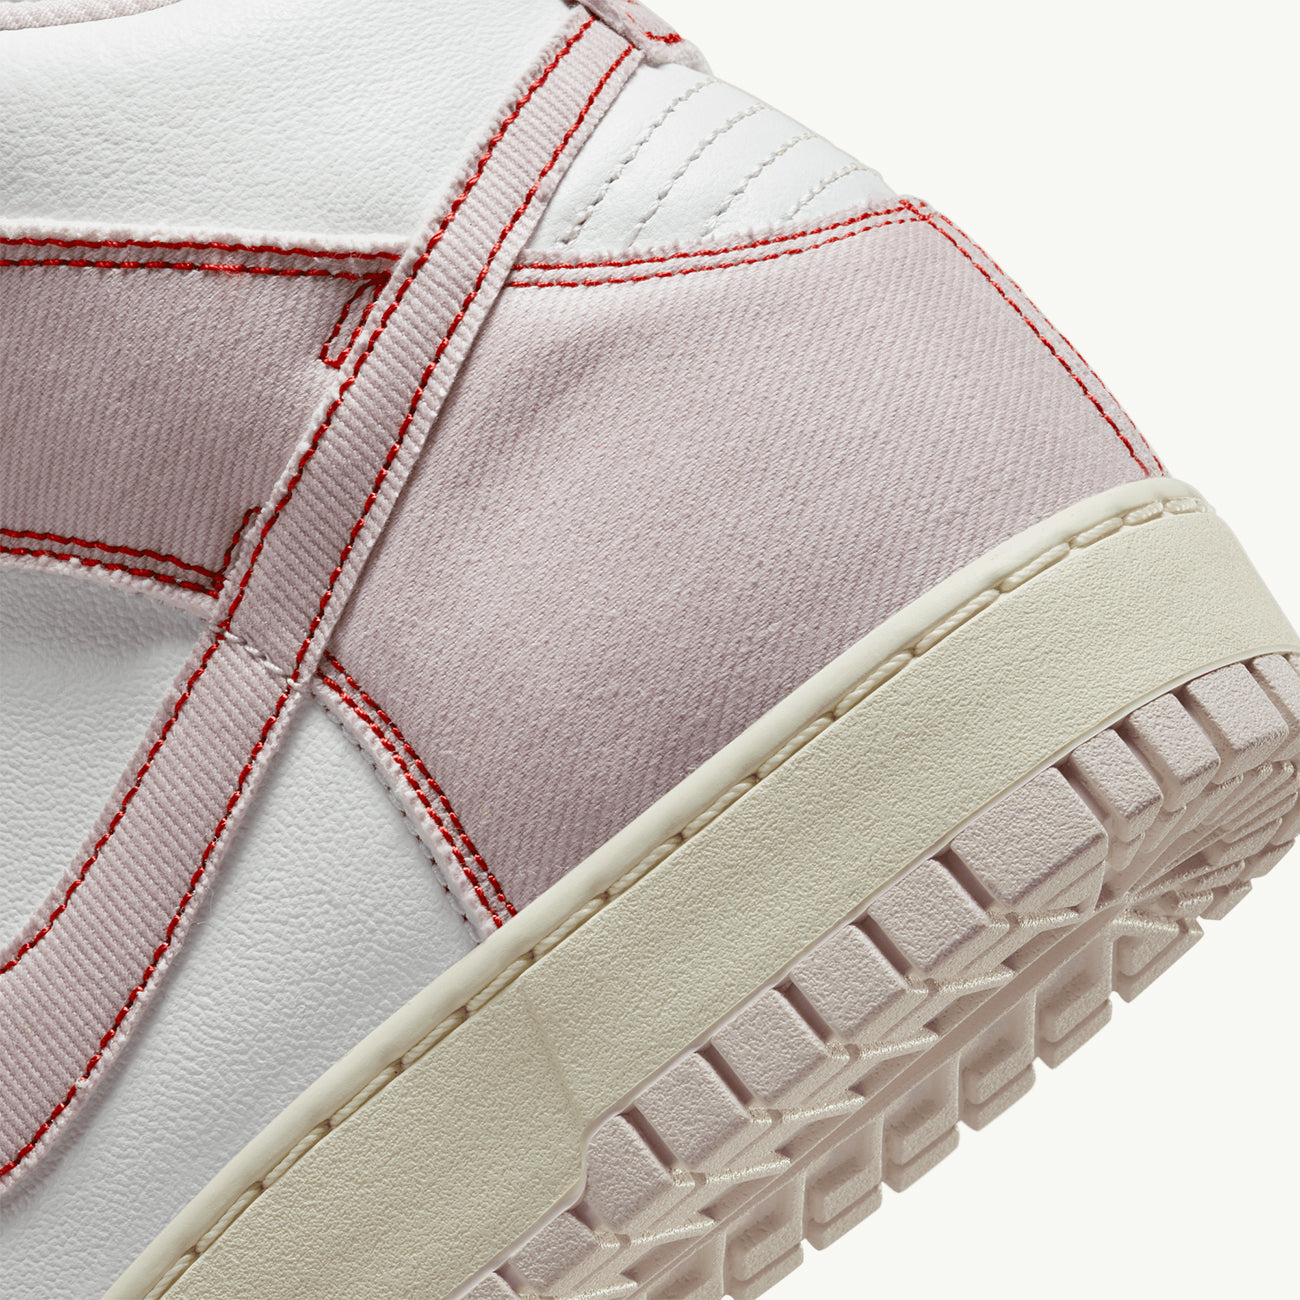 Dunk High 1985 - Summit White/Barely Rose/University Red